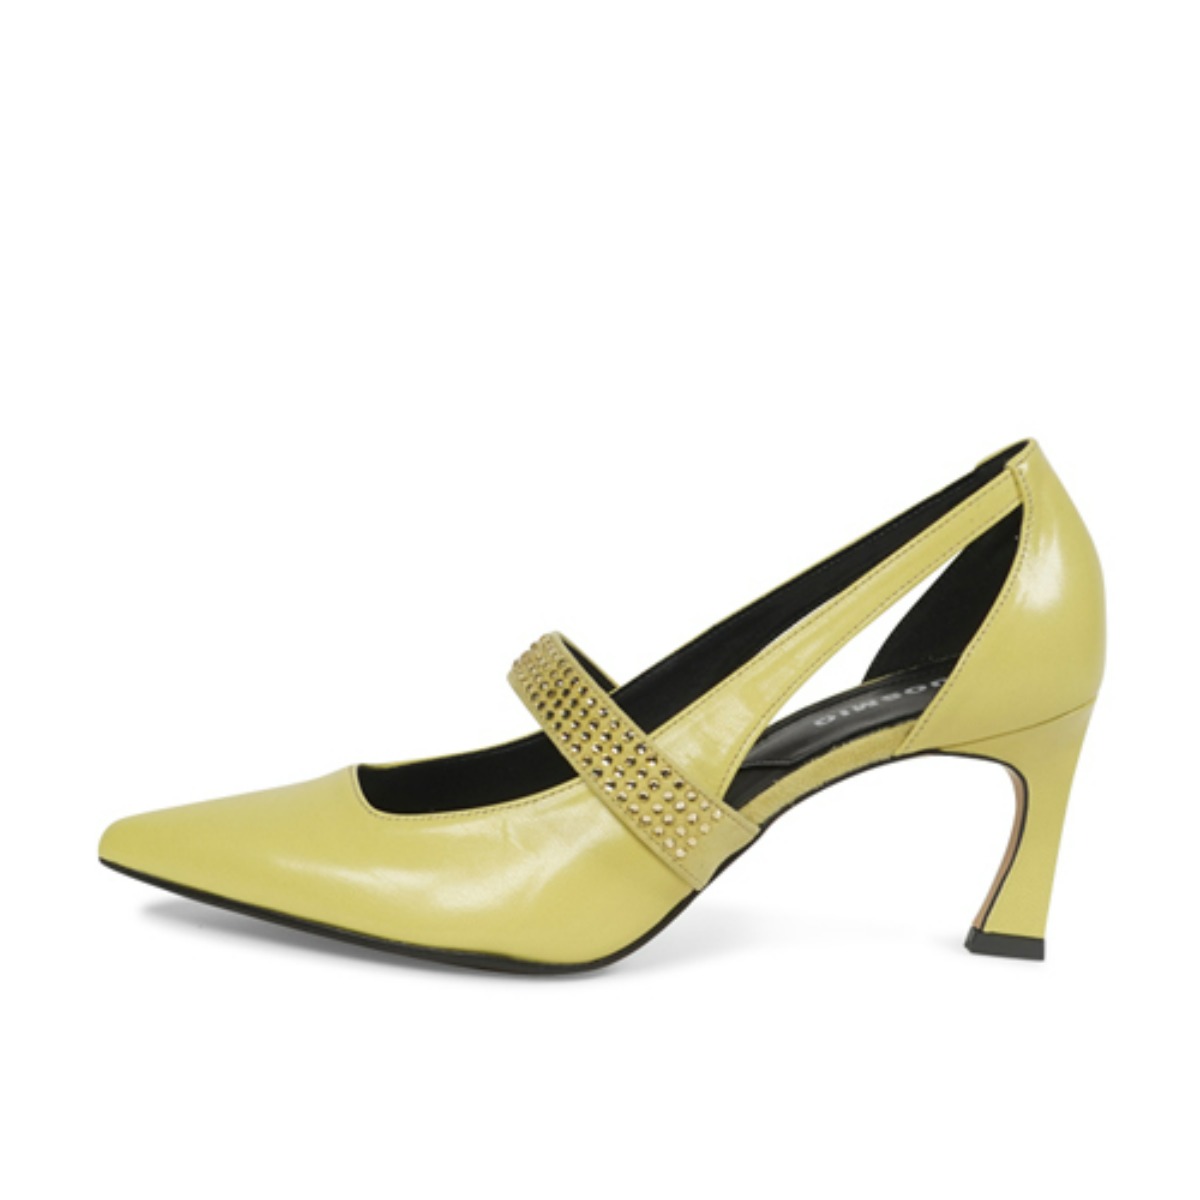 CULUS Cut-out pumps (Yellow)